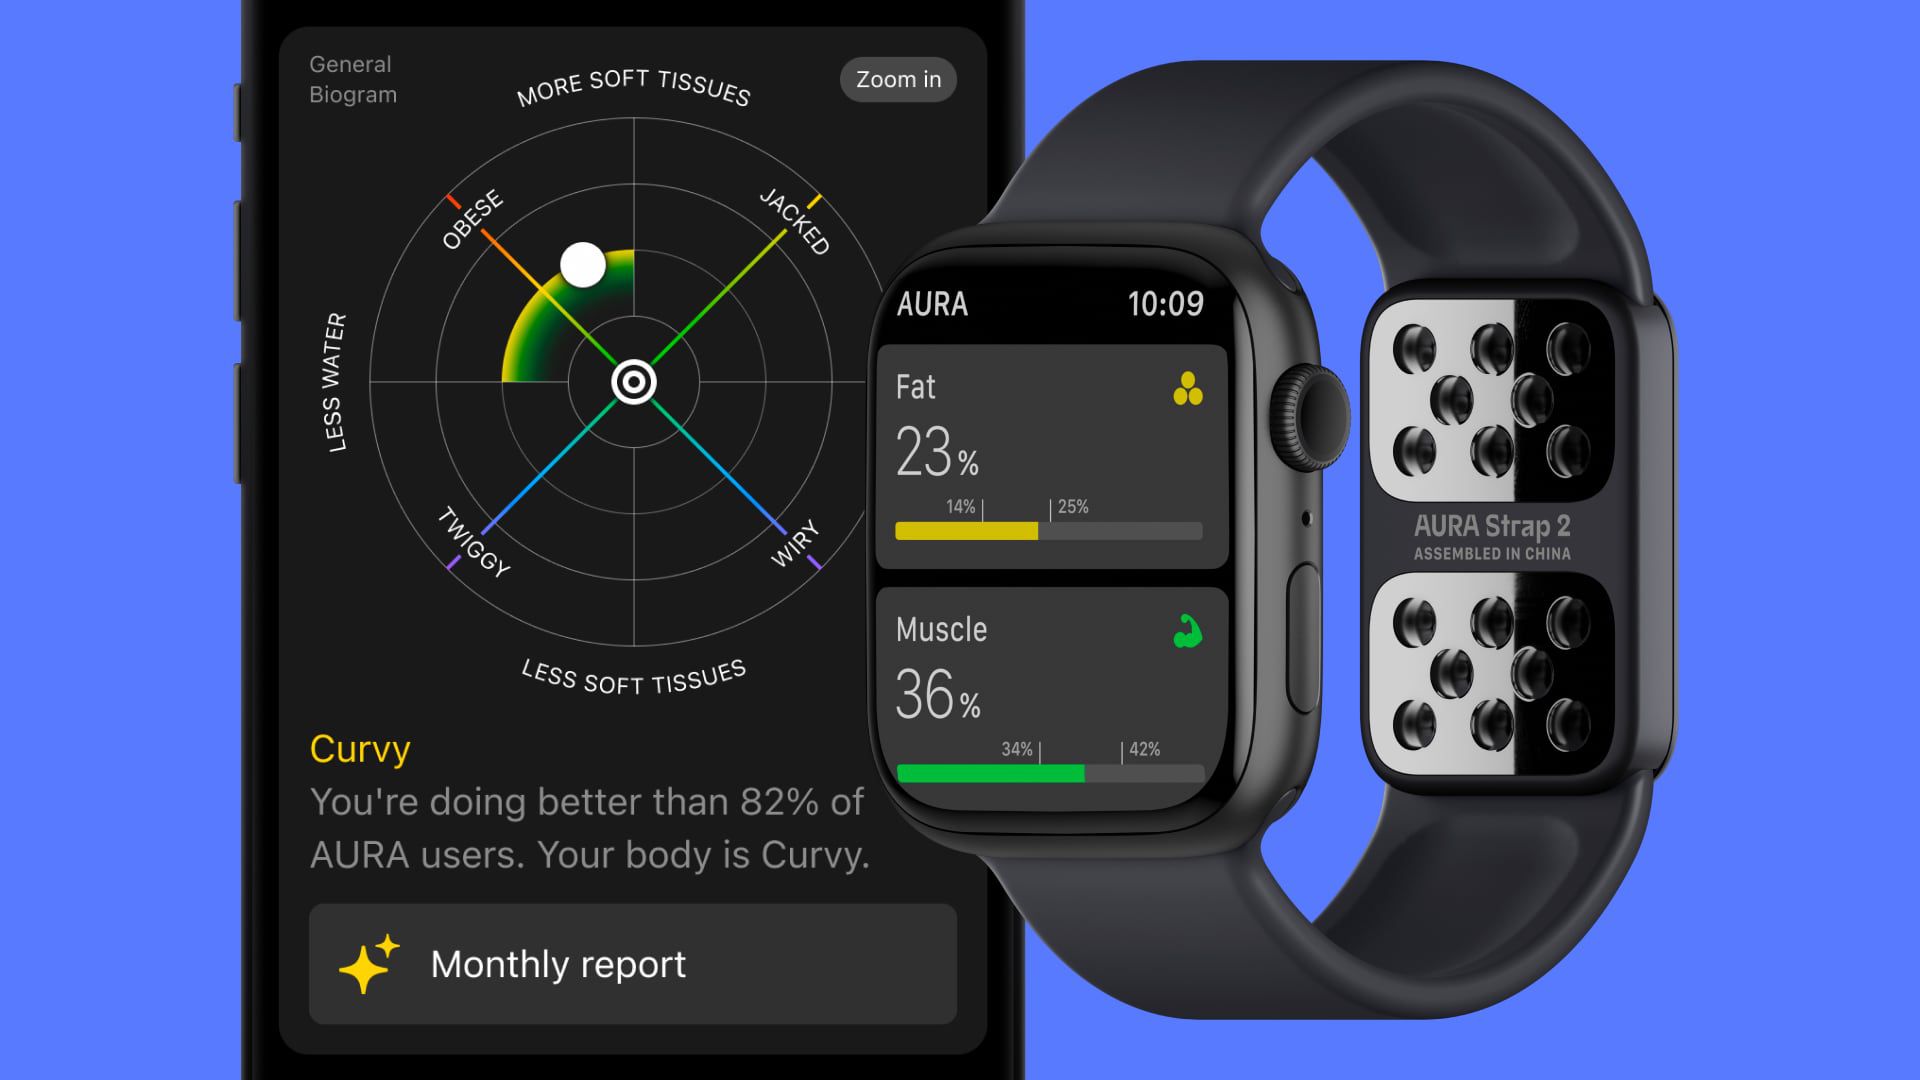 AURA Strap 2 Offers Fat, Muscle and Water Balance Measurements on Apple Watch